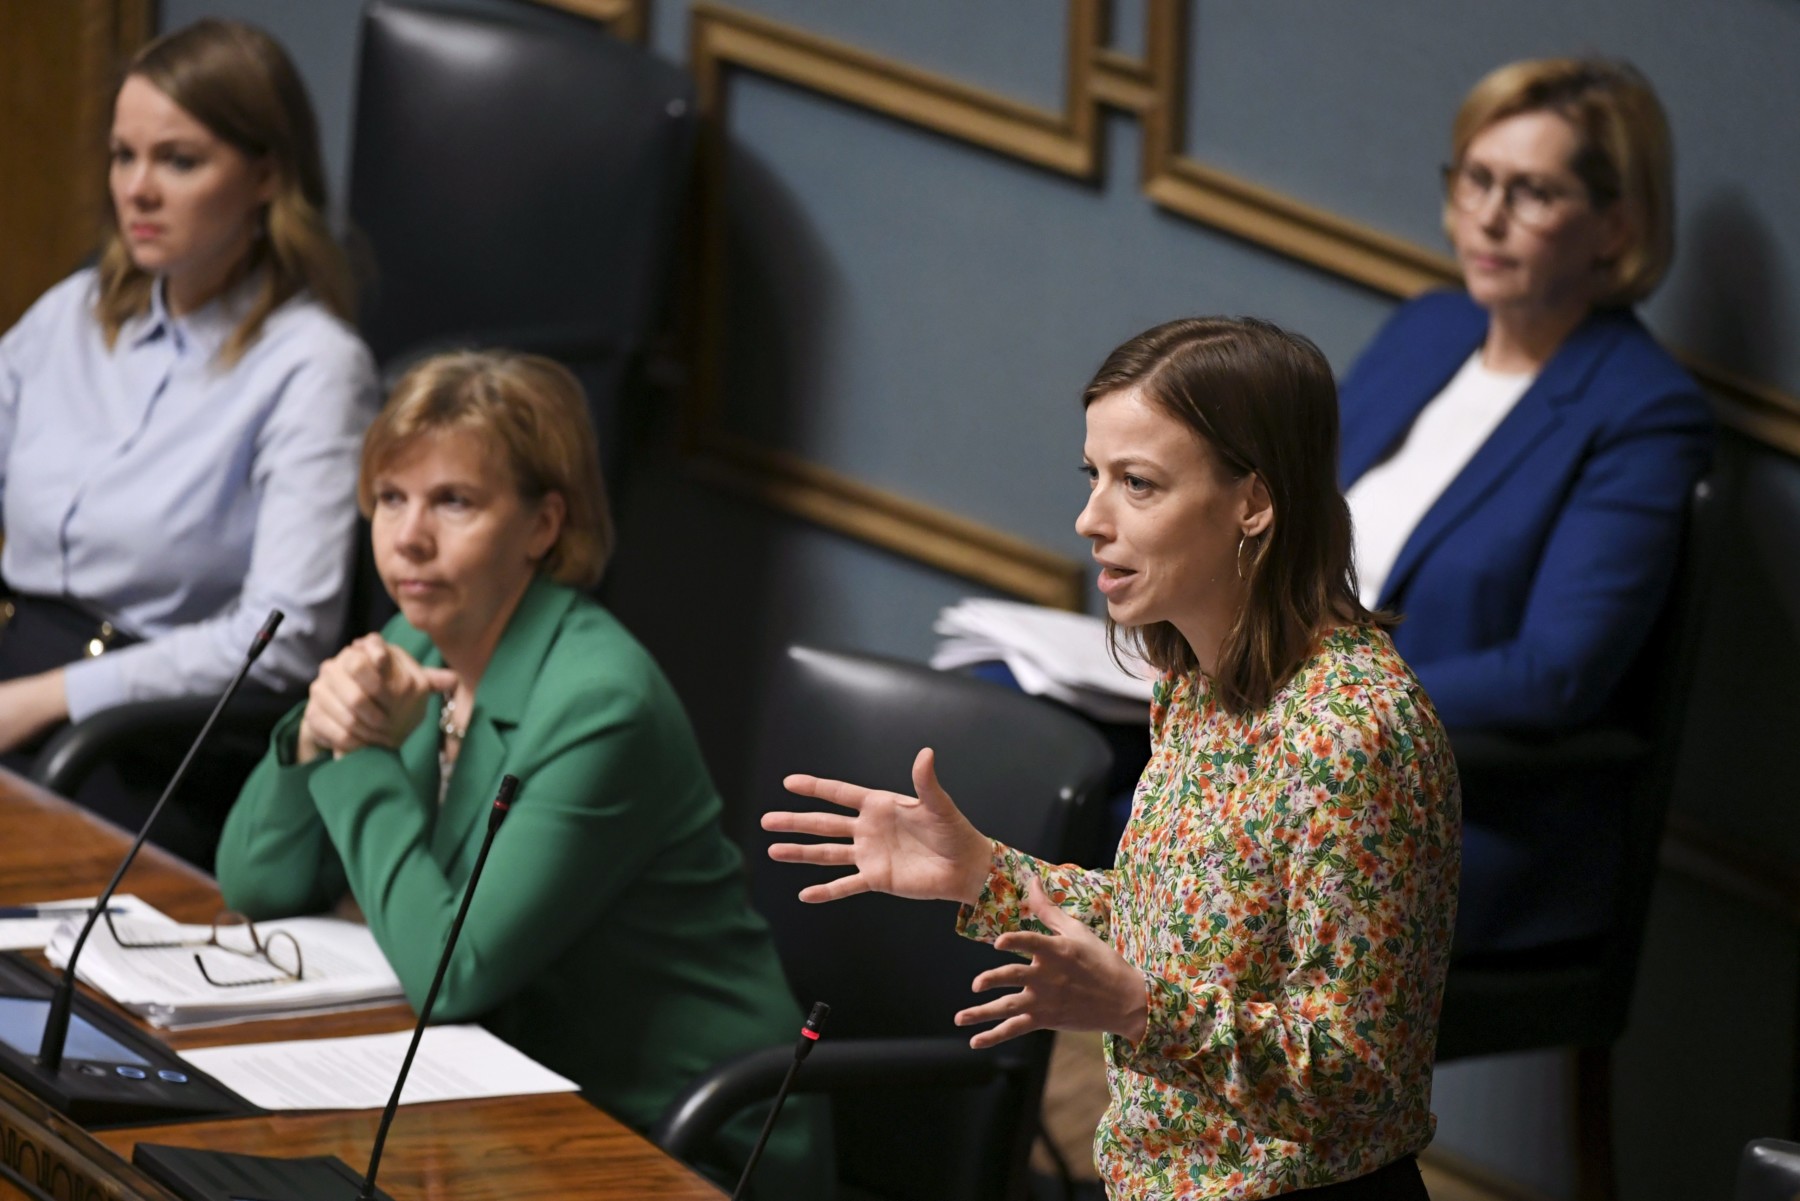 Three women are sitting and listening as a fourth woman delivers a speech before Parliament.